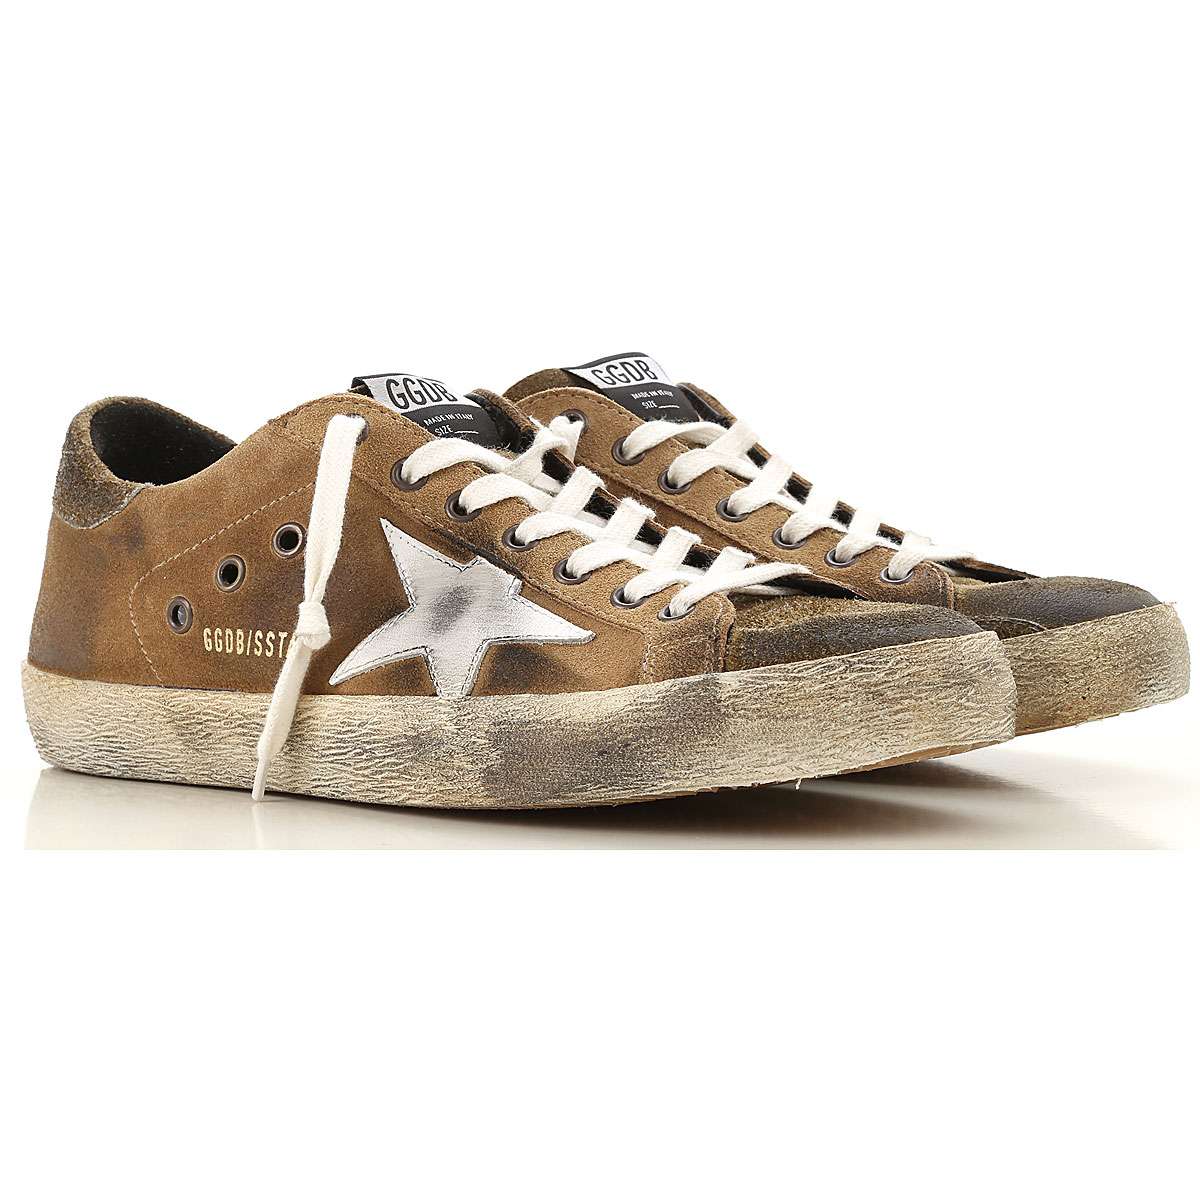 Mens Shoes Golden Goose, Style code: g34ms590